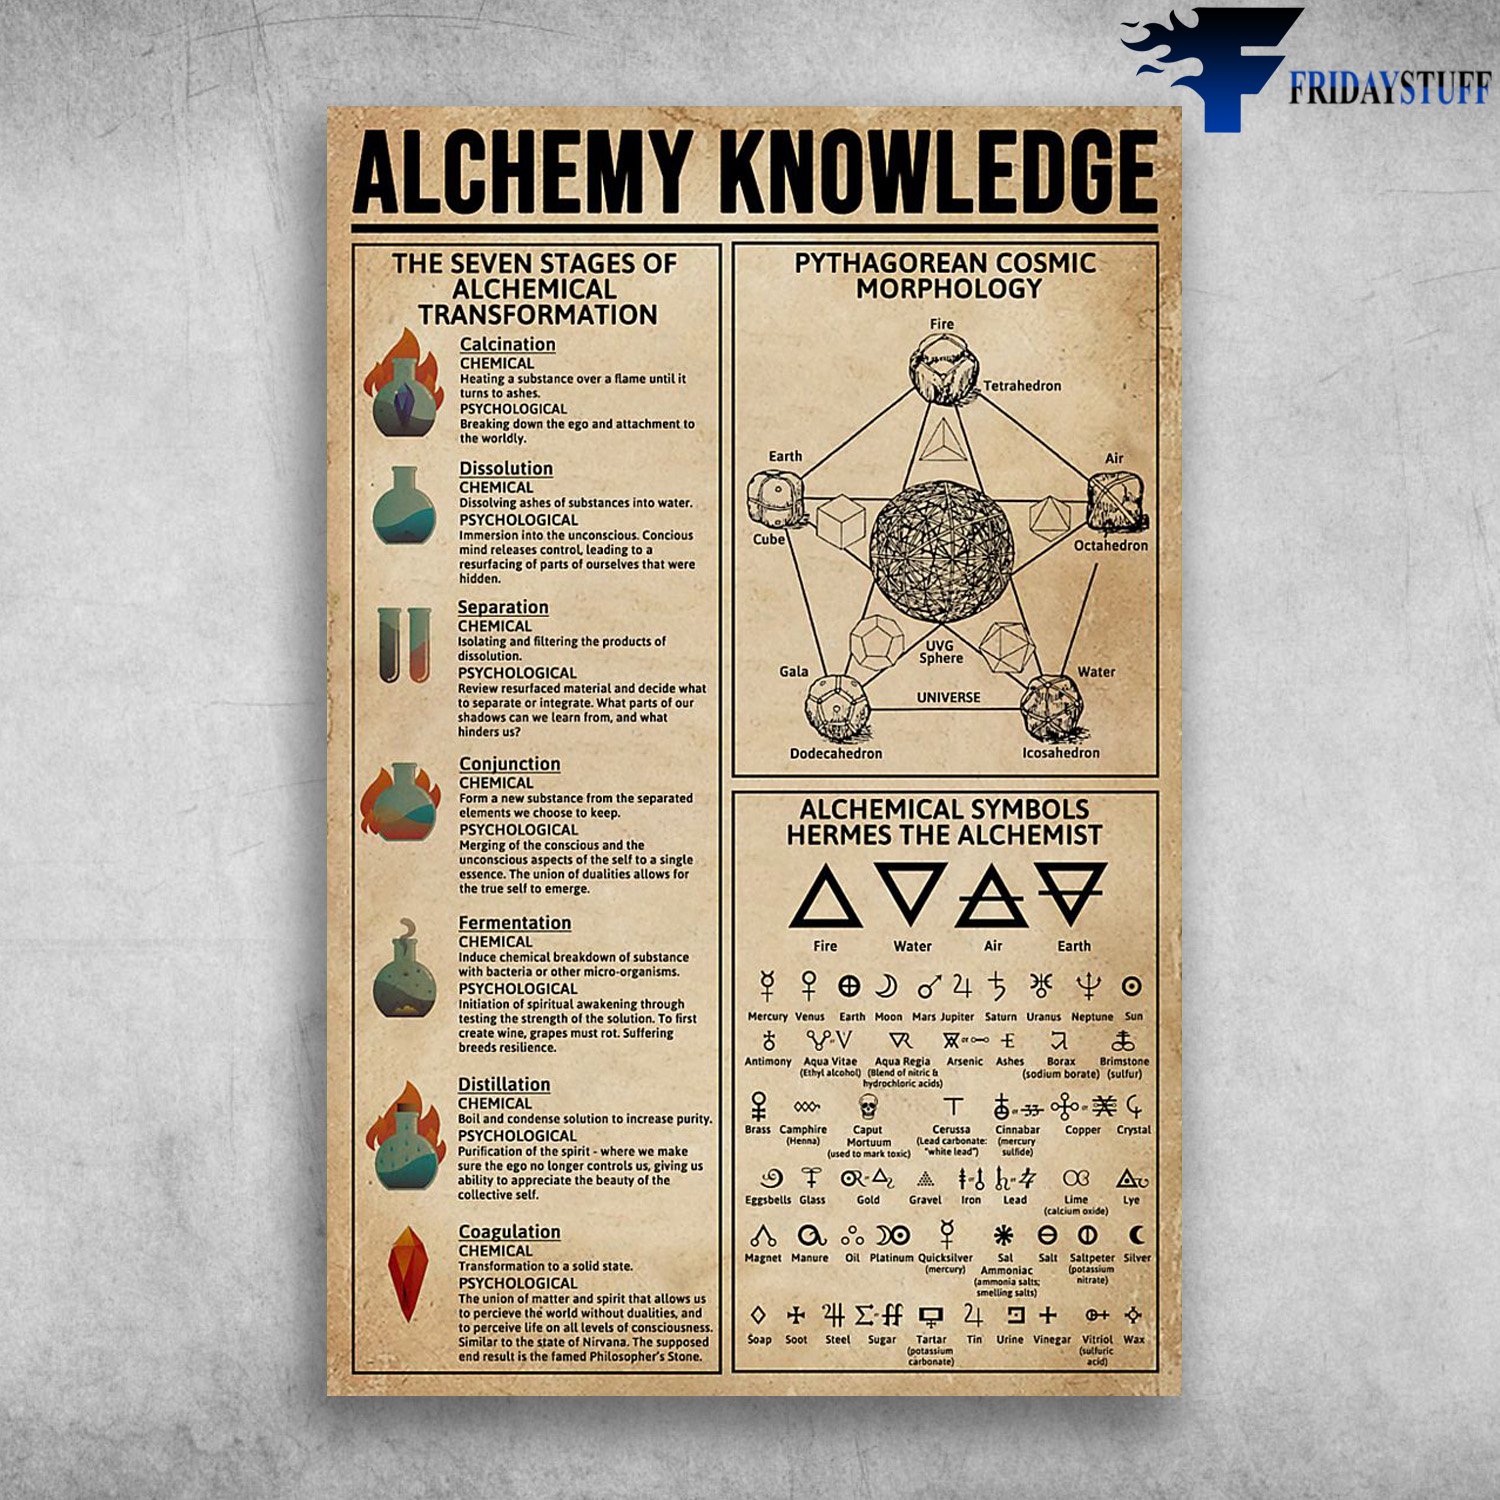 The Knowledge About Alchemy - The Seven Stages Of Alchemical Transformation